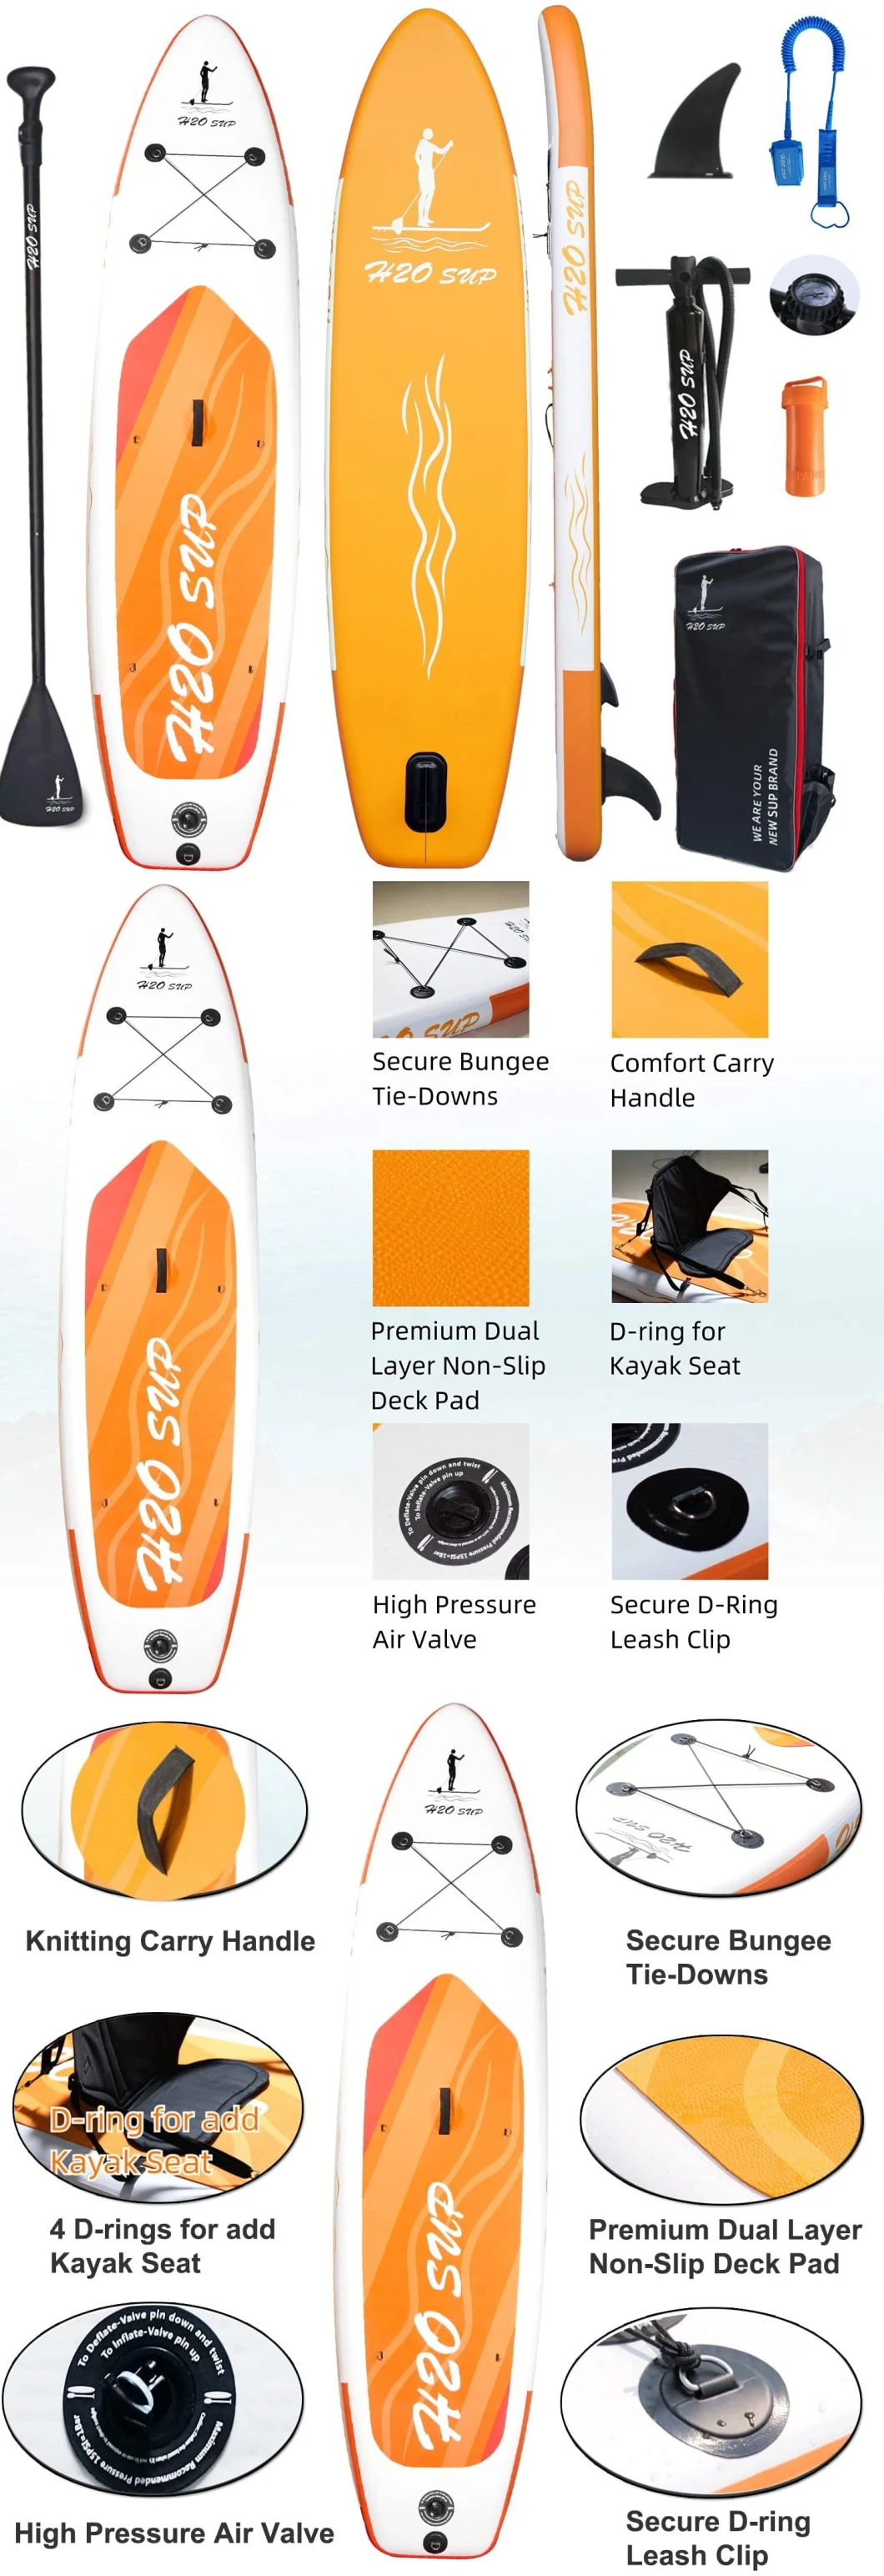 Drop Stitch Double Layer Inflatable Stand up Paddle Board for Surfing in 10&prime;6FT Length 30&prime;&prime; Width